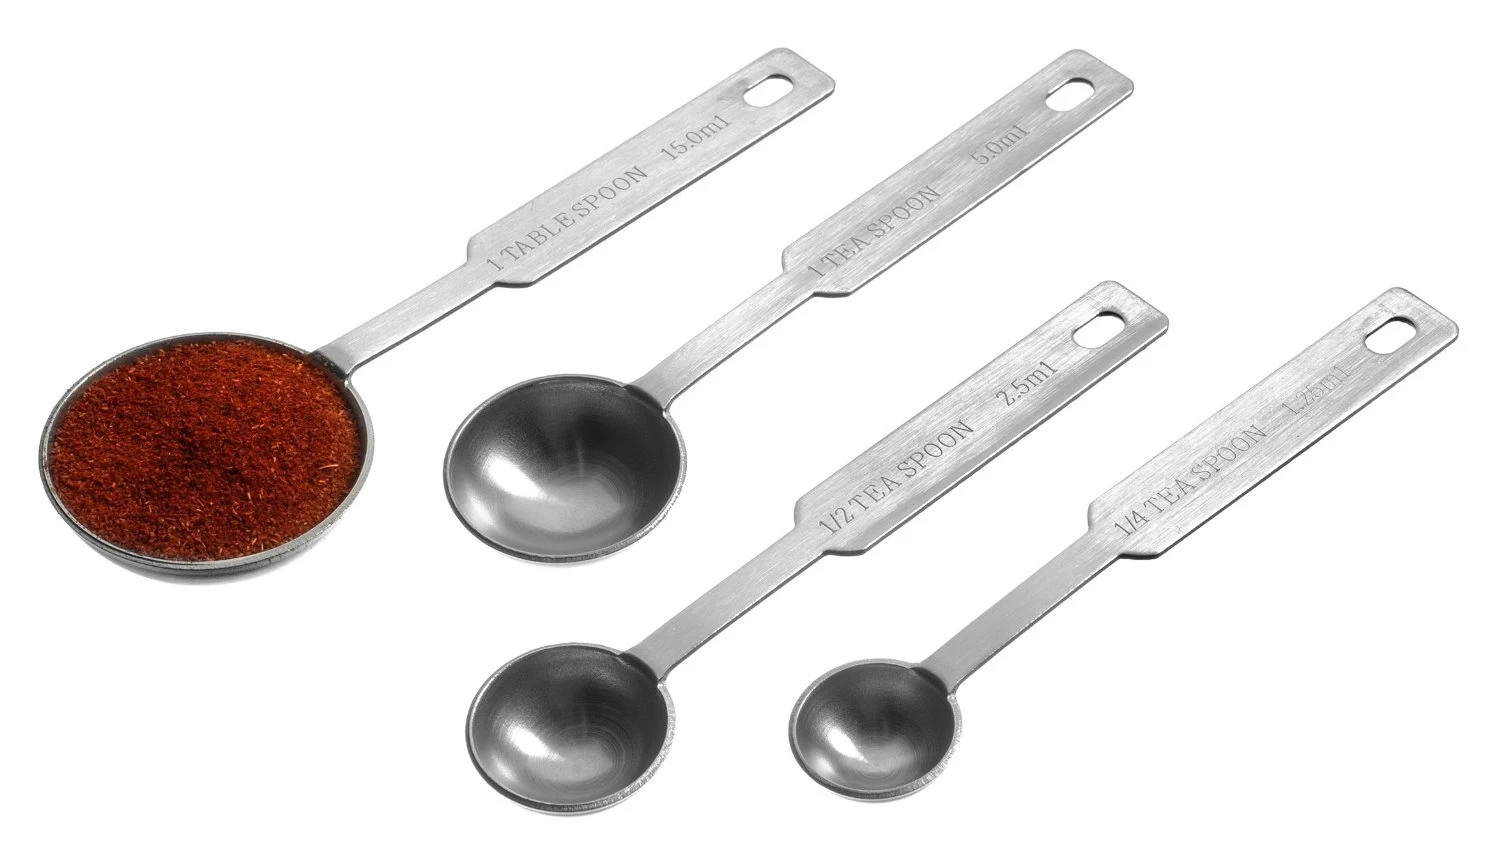 oem Stainless Steel Mearsuring Spoon, Stainless Steel Mearsuring Spoon china